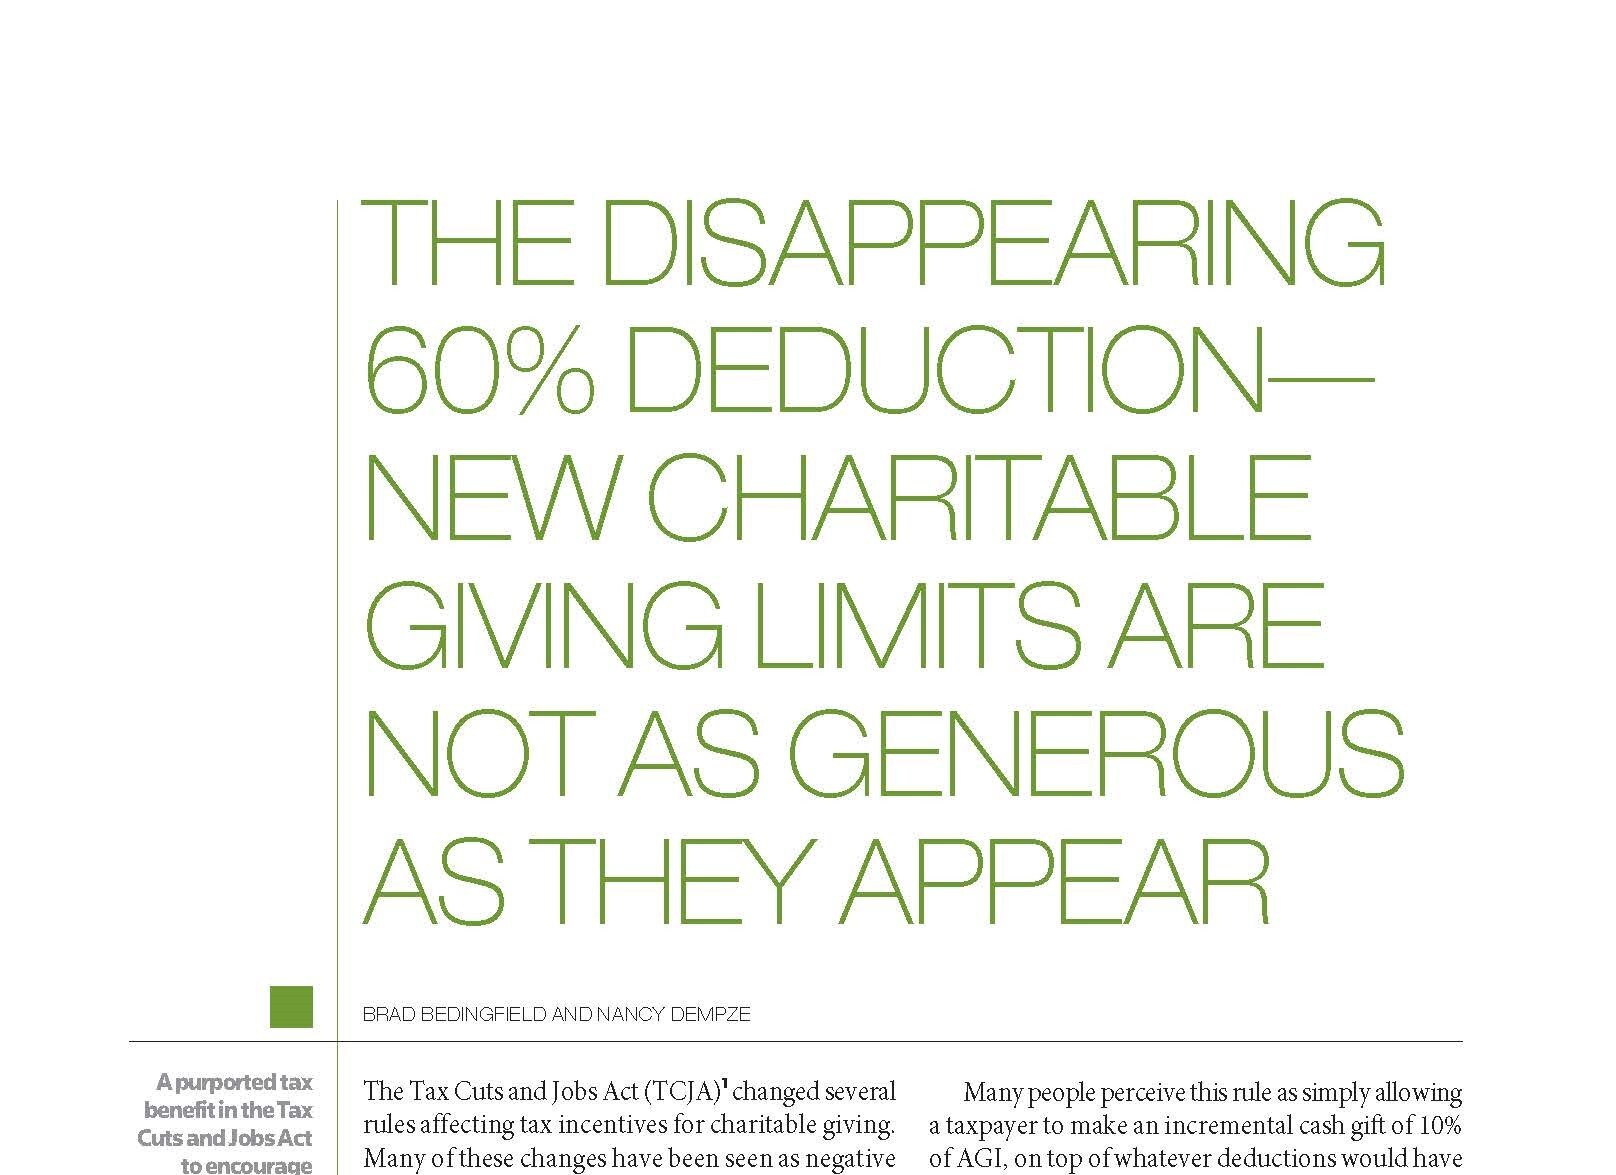 The Disappearing 60% Deduction